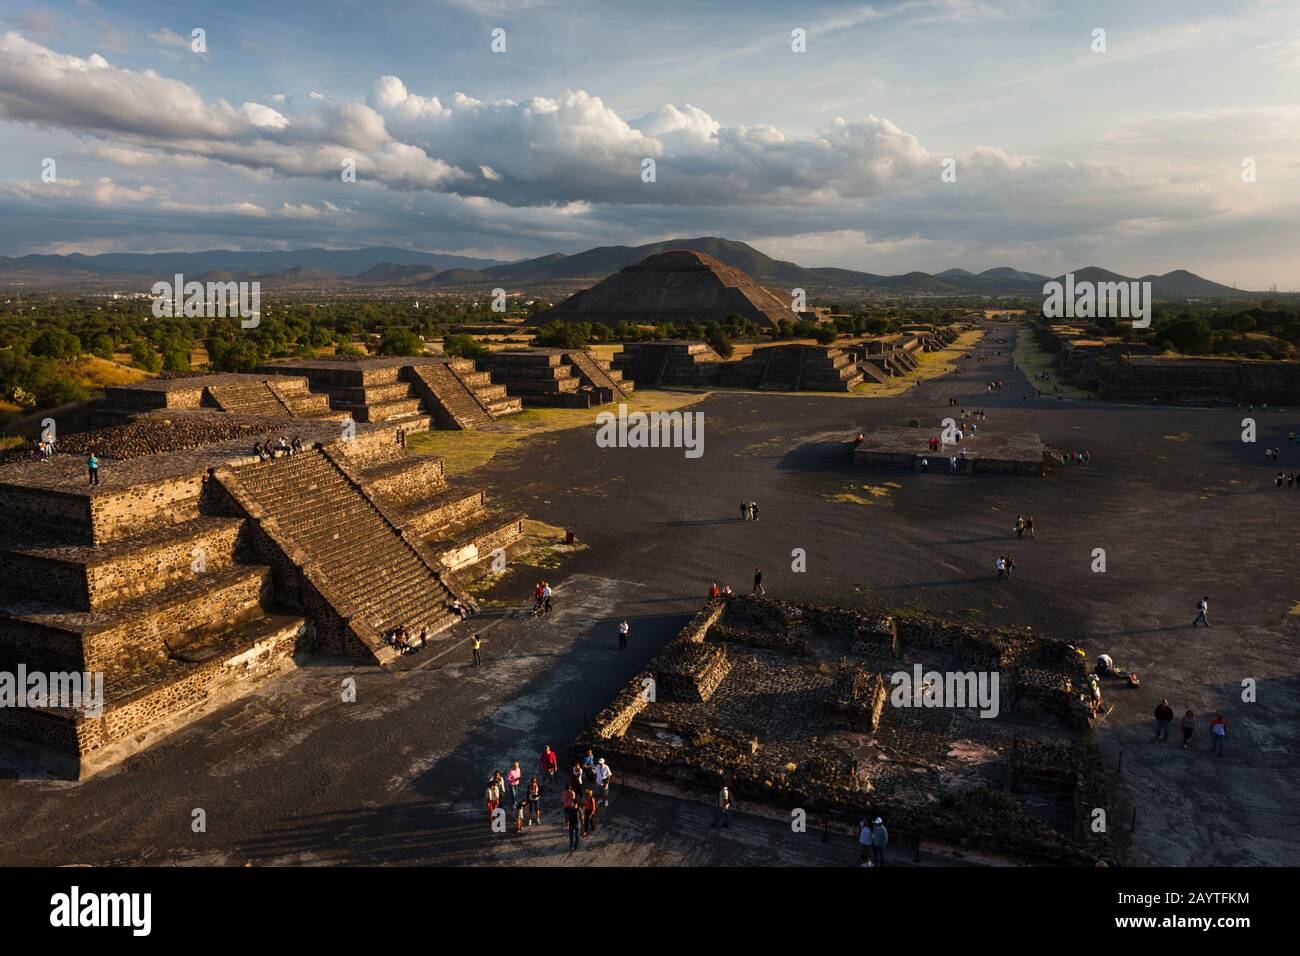 Avenue of the Dead and Pyramid of the Sun, from Moon Pyramid, at, evening, Teotihuacan, suburb of Mexico City, Mexico, Central America Stock Photo